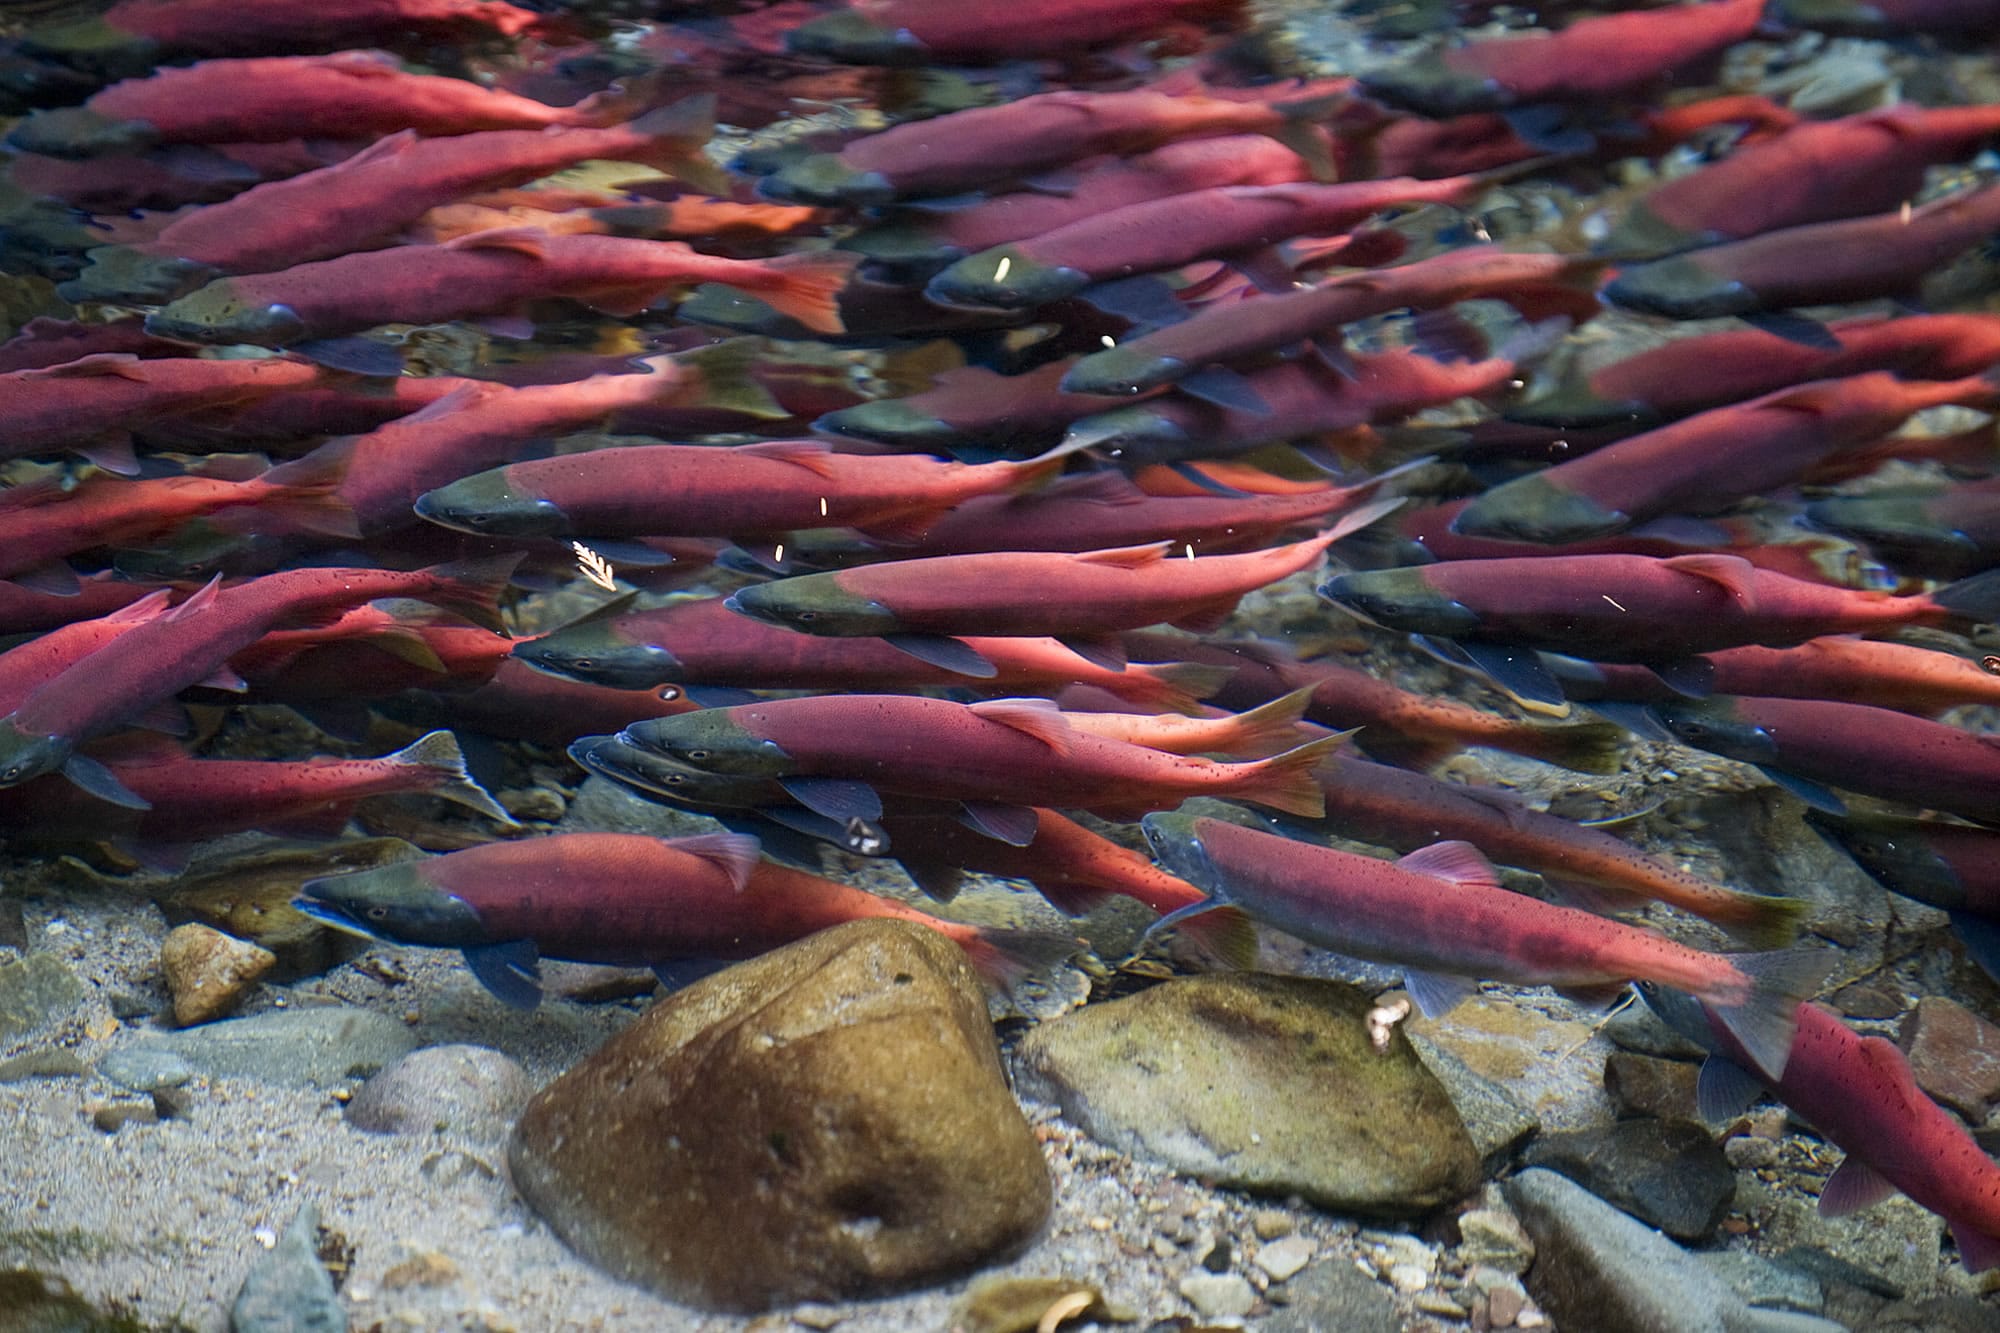 Yale Reservoir's kokanee now spawn in the North Fork of the Lewis River near Swift Dam as well as in Cougar Creek.